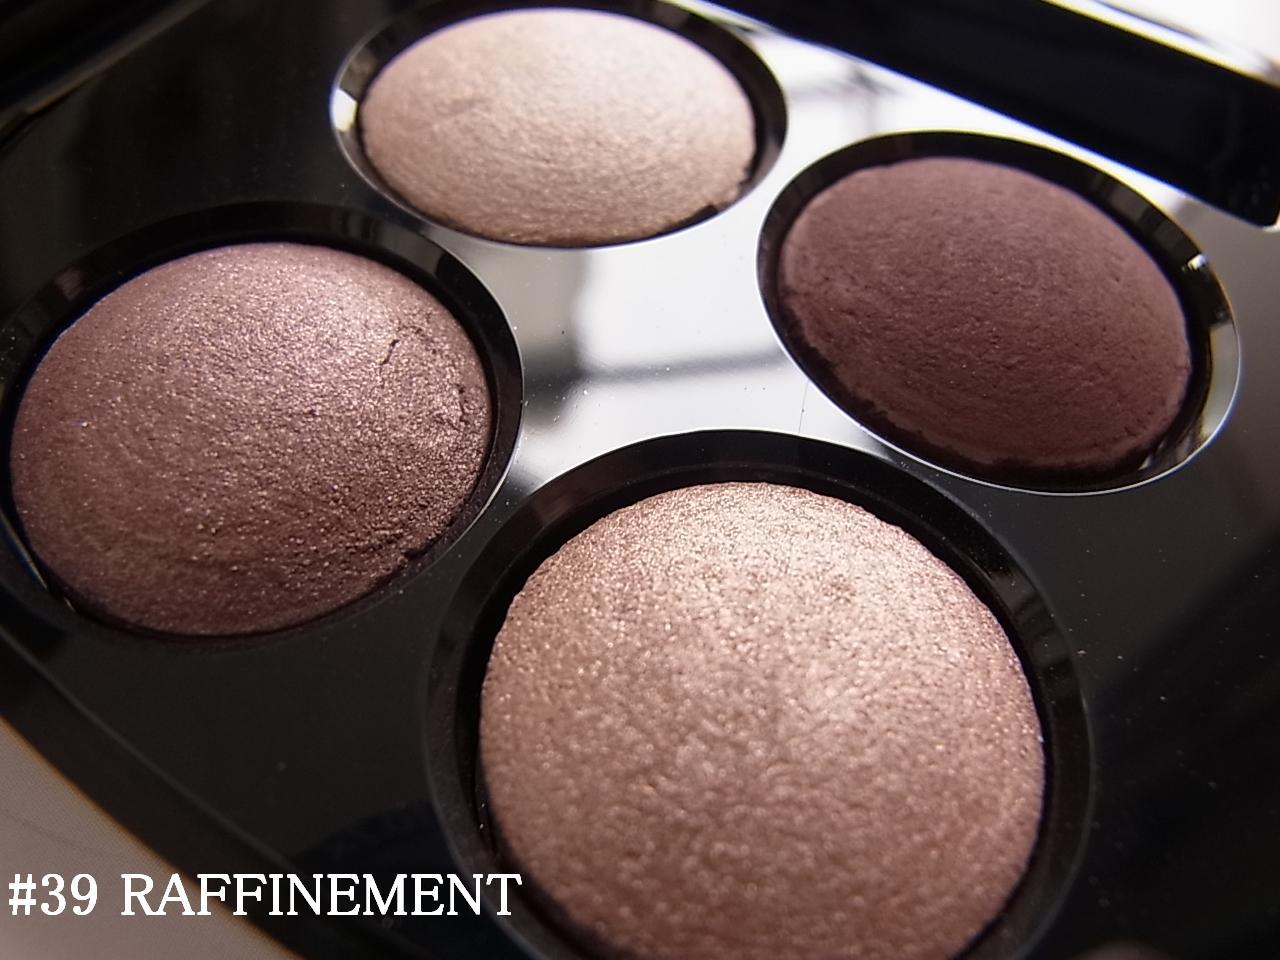 CHANEL】LES 4 OMBRES #39 RAFFINEMENT | atsuknさんのブログ - @cosme 